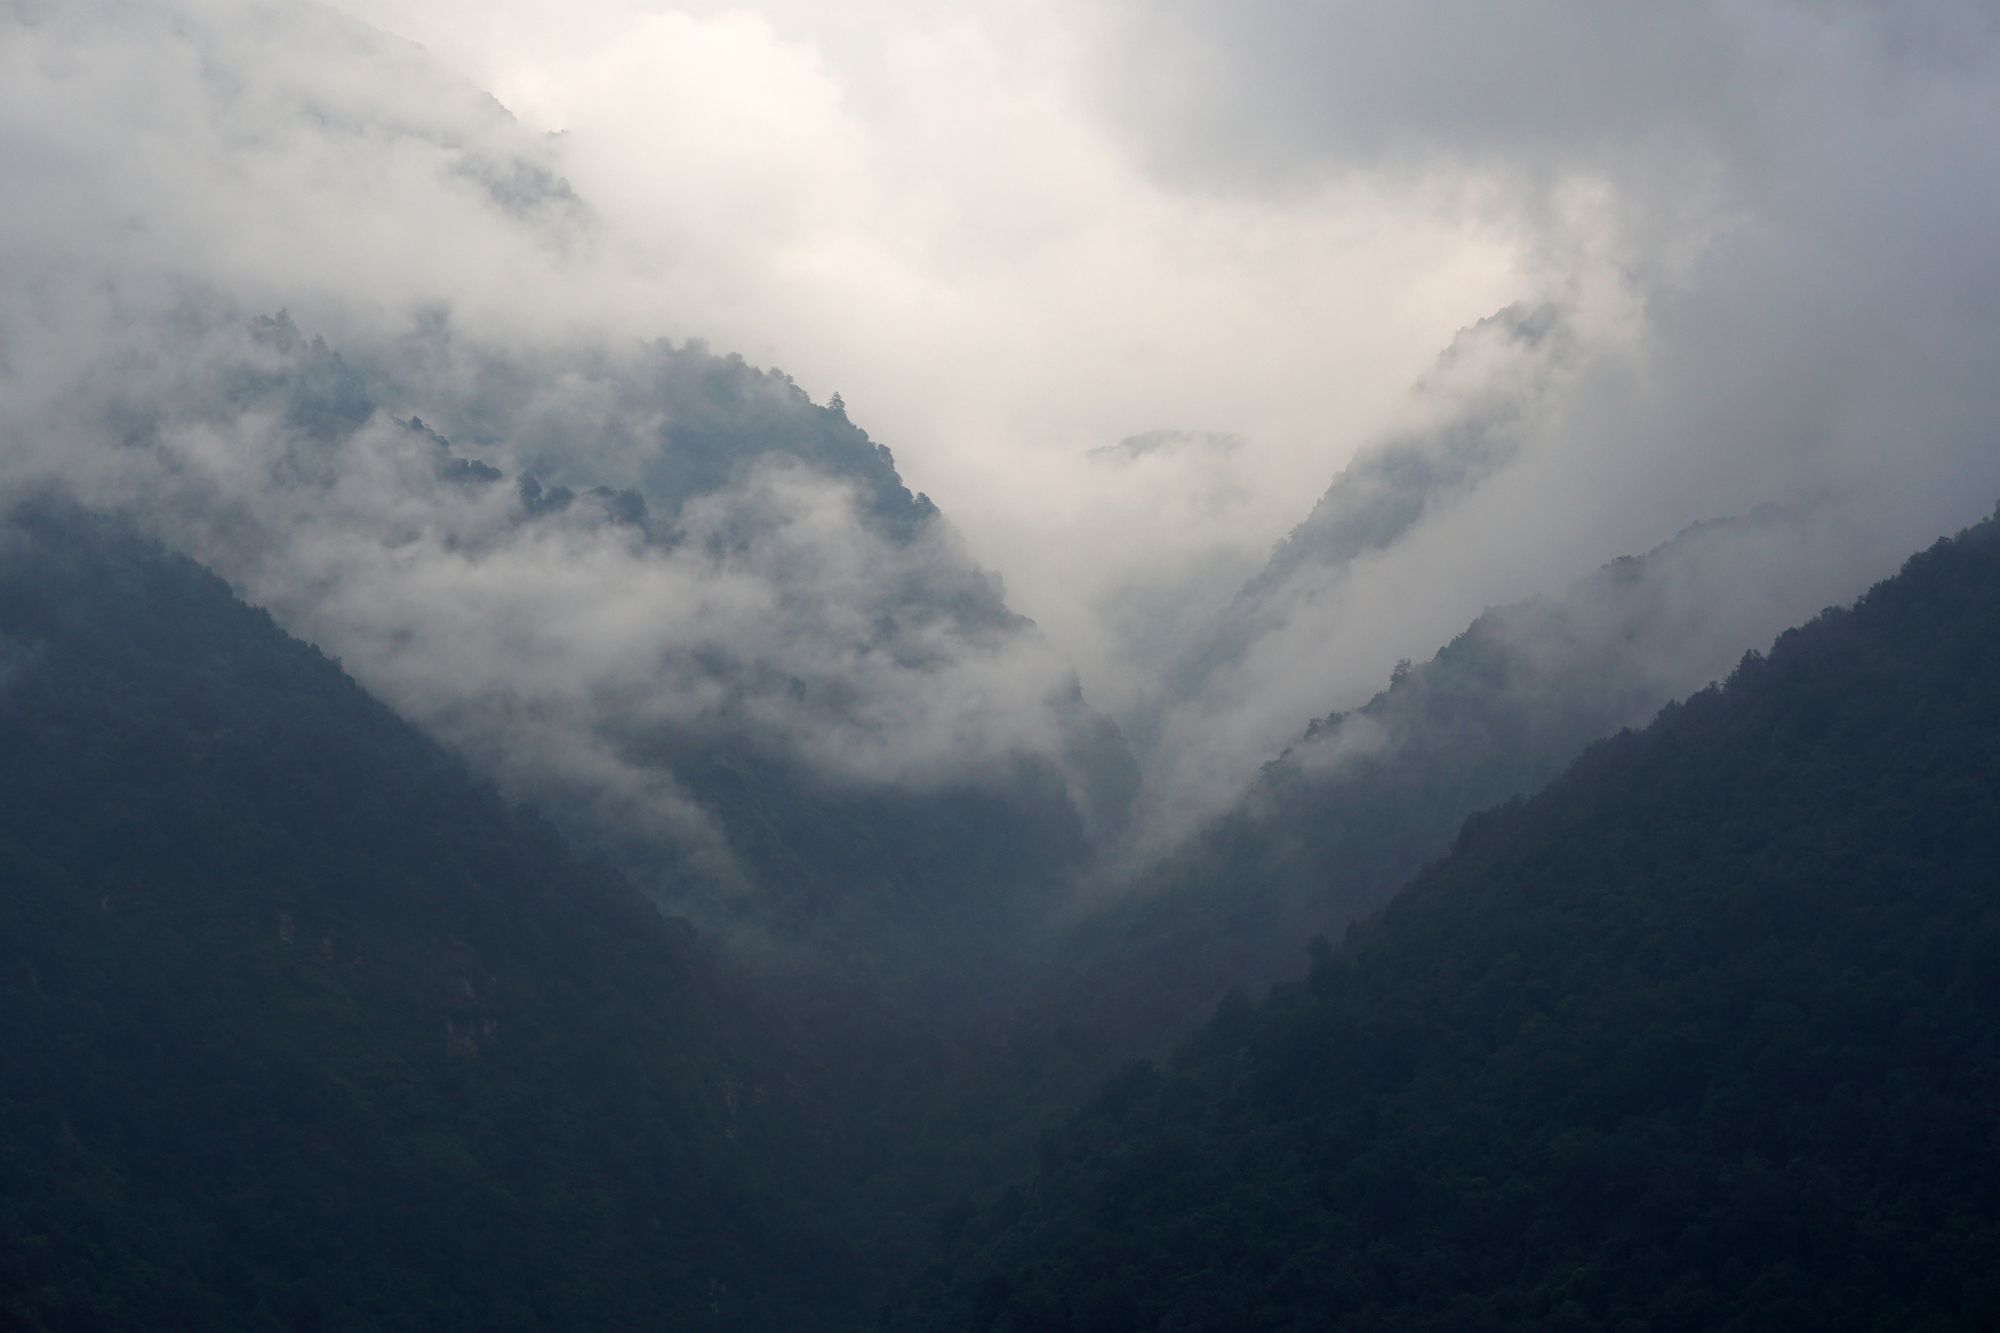 Annapurna Massif in Nepal, shrouded with clouds.